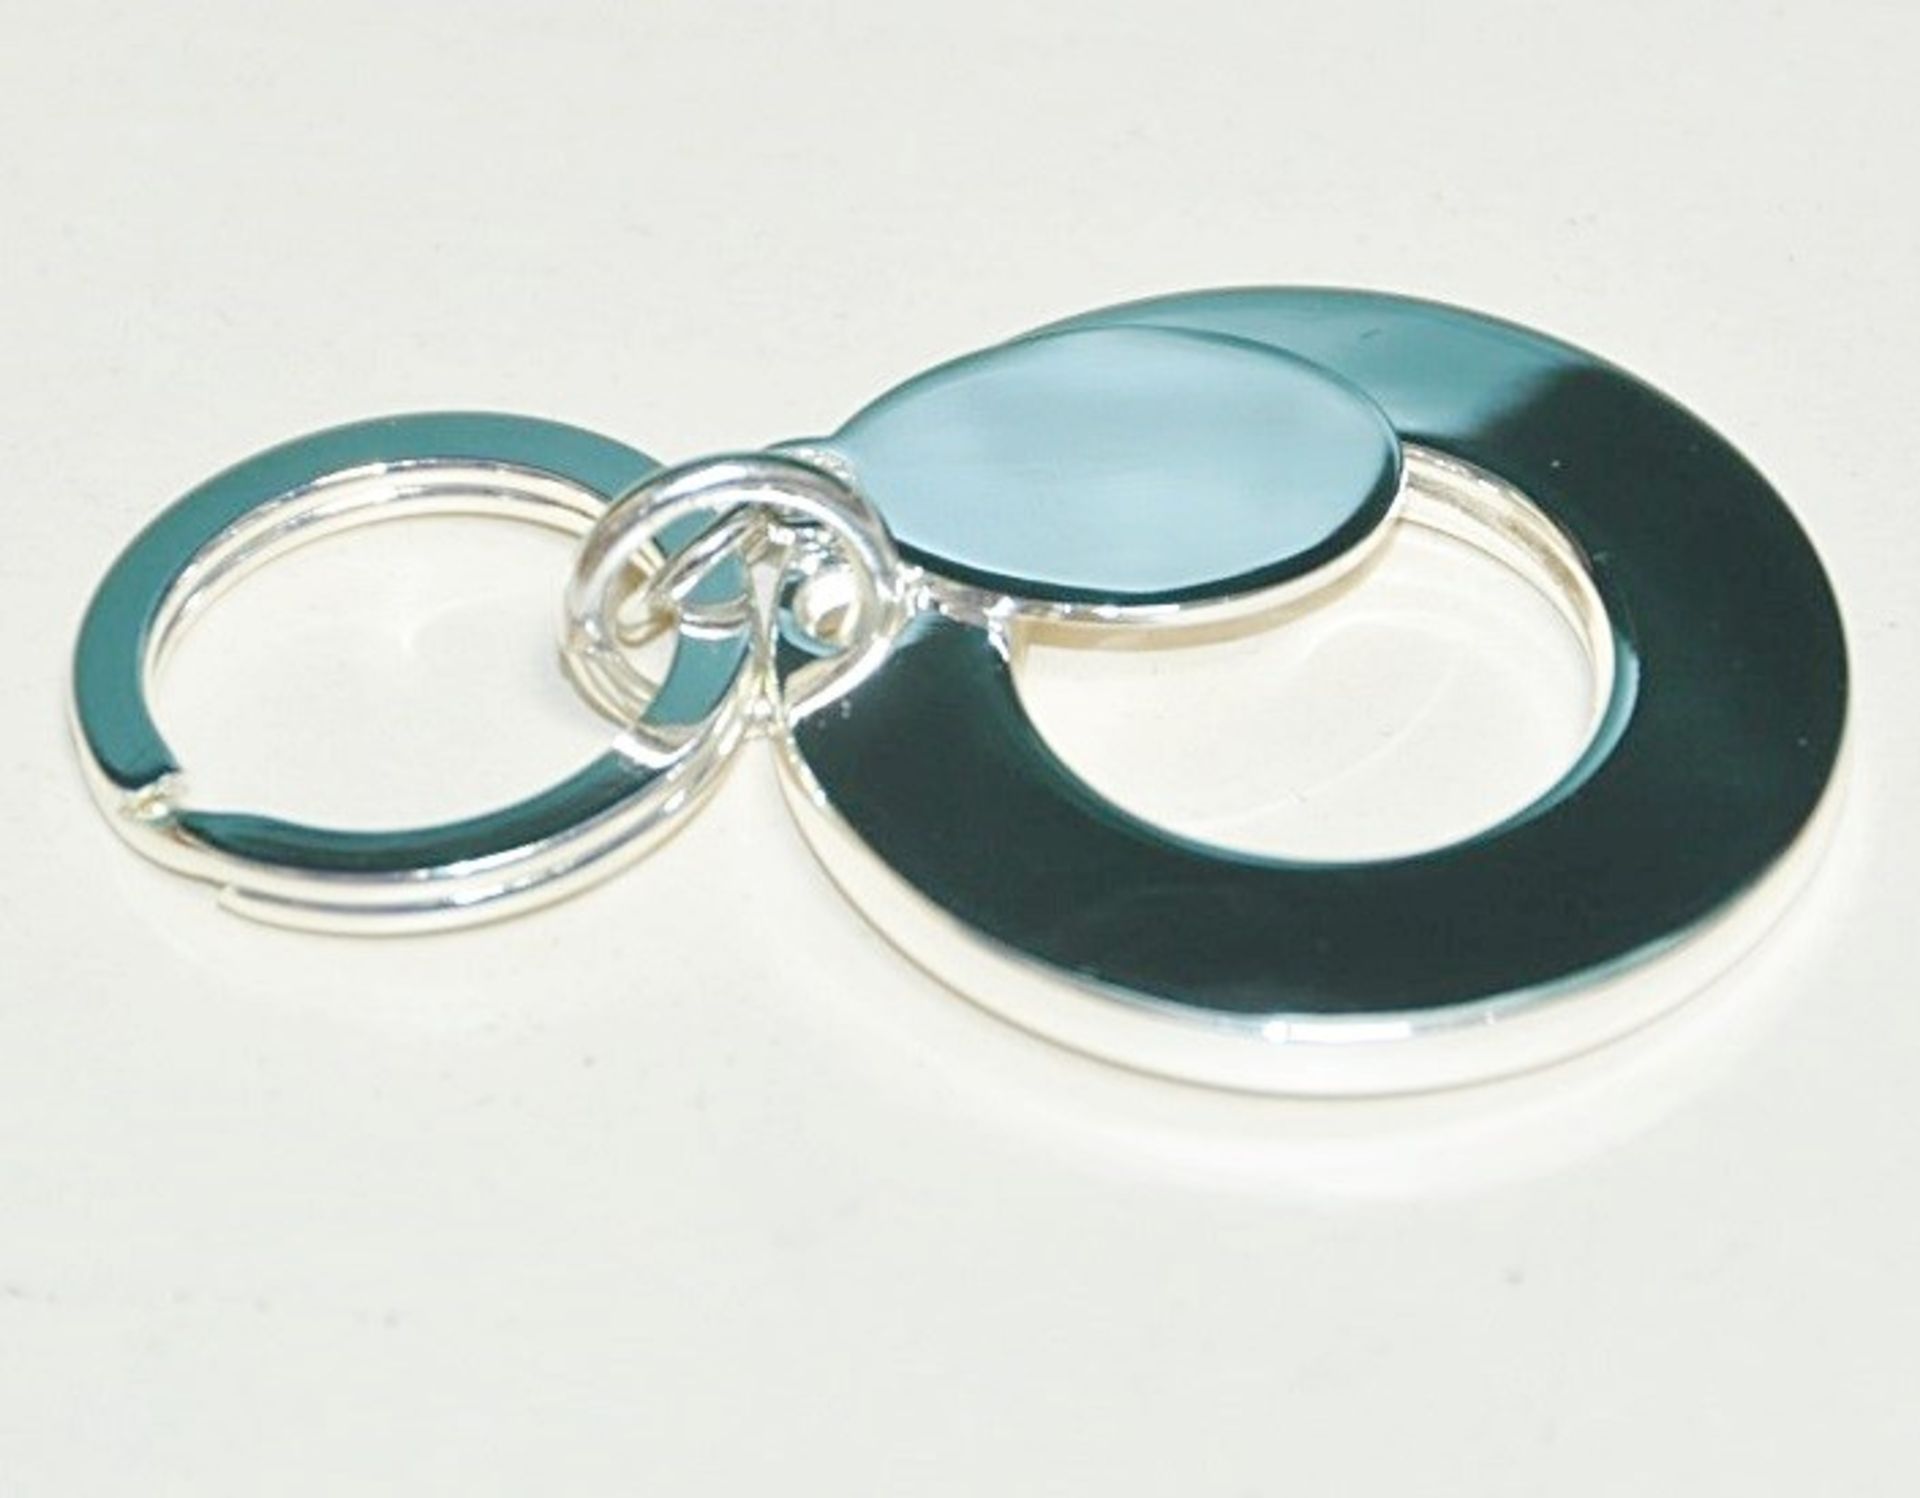 50 x Silver Plated Key Rings By ICE London - Design: SOLAR - MADE WITH "SWAROVSKI¨ ELEMENTS - Luxury - Image 3 of 4